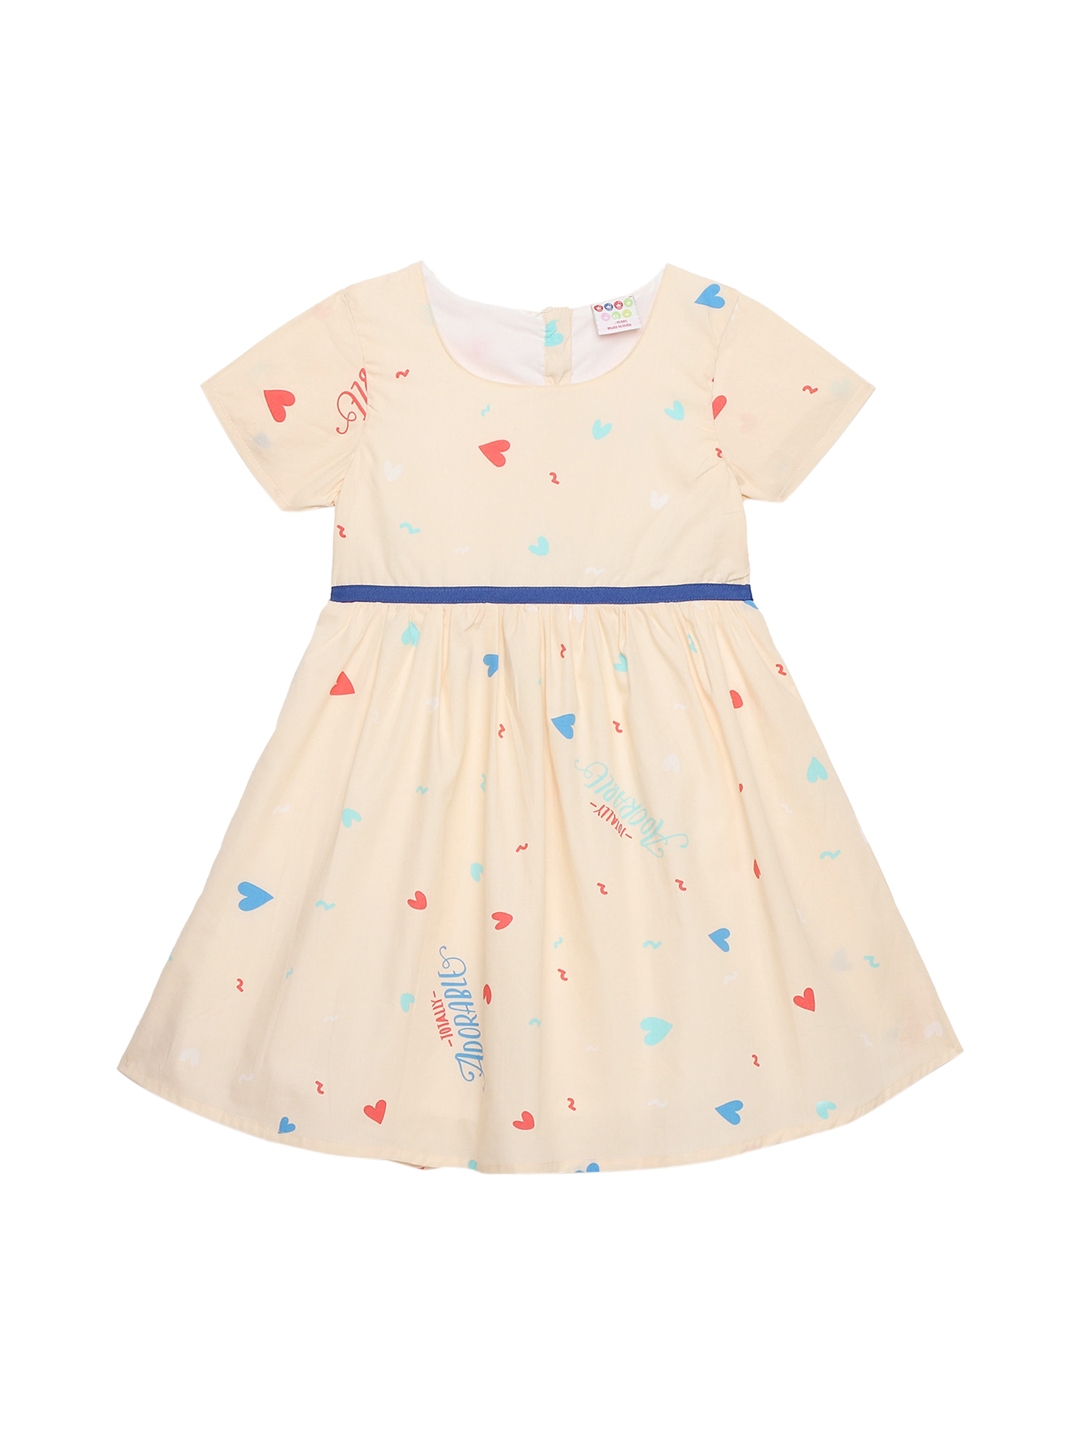 Buy ZION Off White Dress - Dresses for Girls 15752704 | Myntra